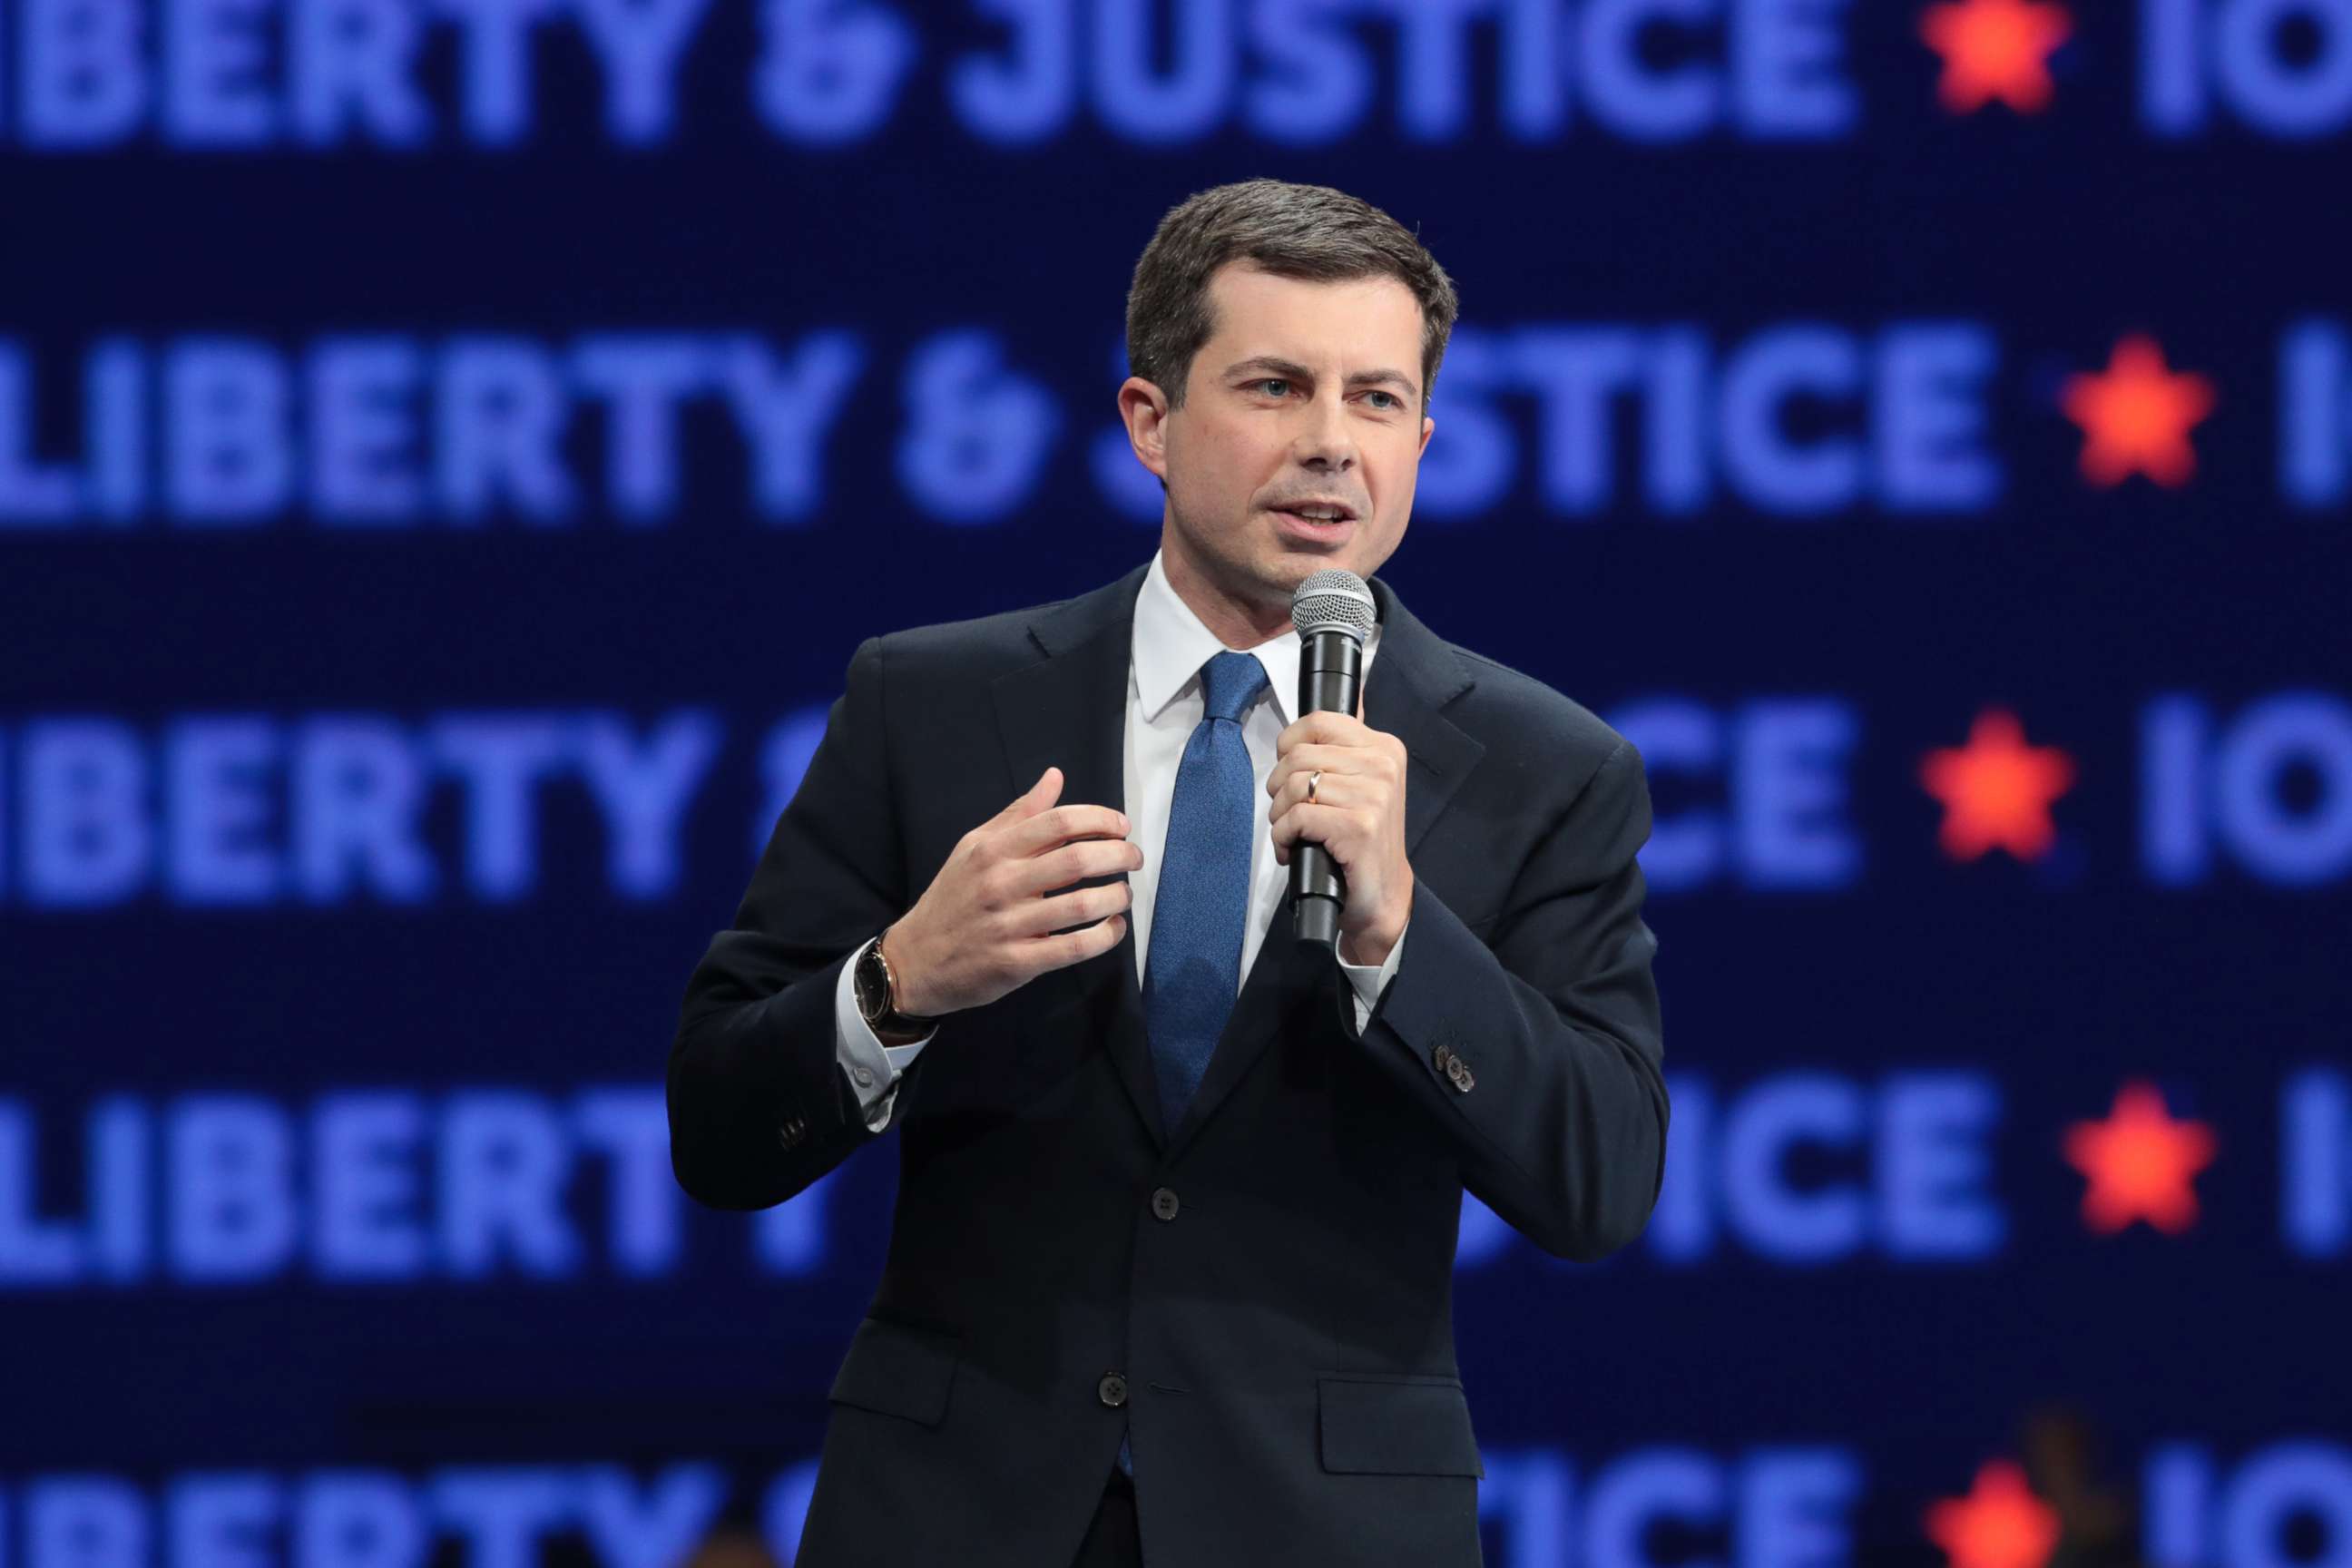 PHOTO: Democratic presidential candidate South Bend, Indiana Mayor Pete Buttigieg speaks at the Liberty and Justice Celebration at the Wells Fargo Arena on November 01, 2019 in Des Moines, Iowa.